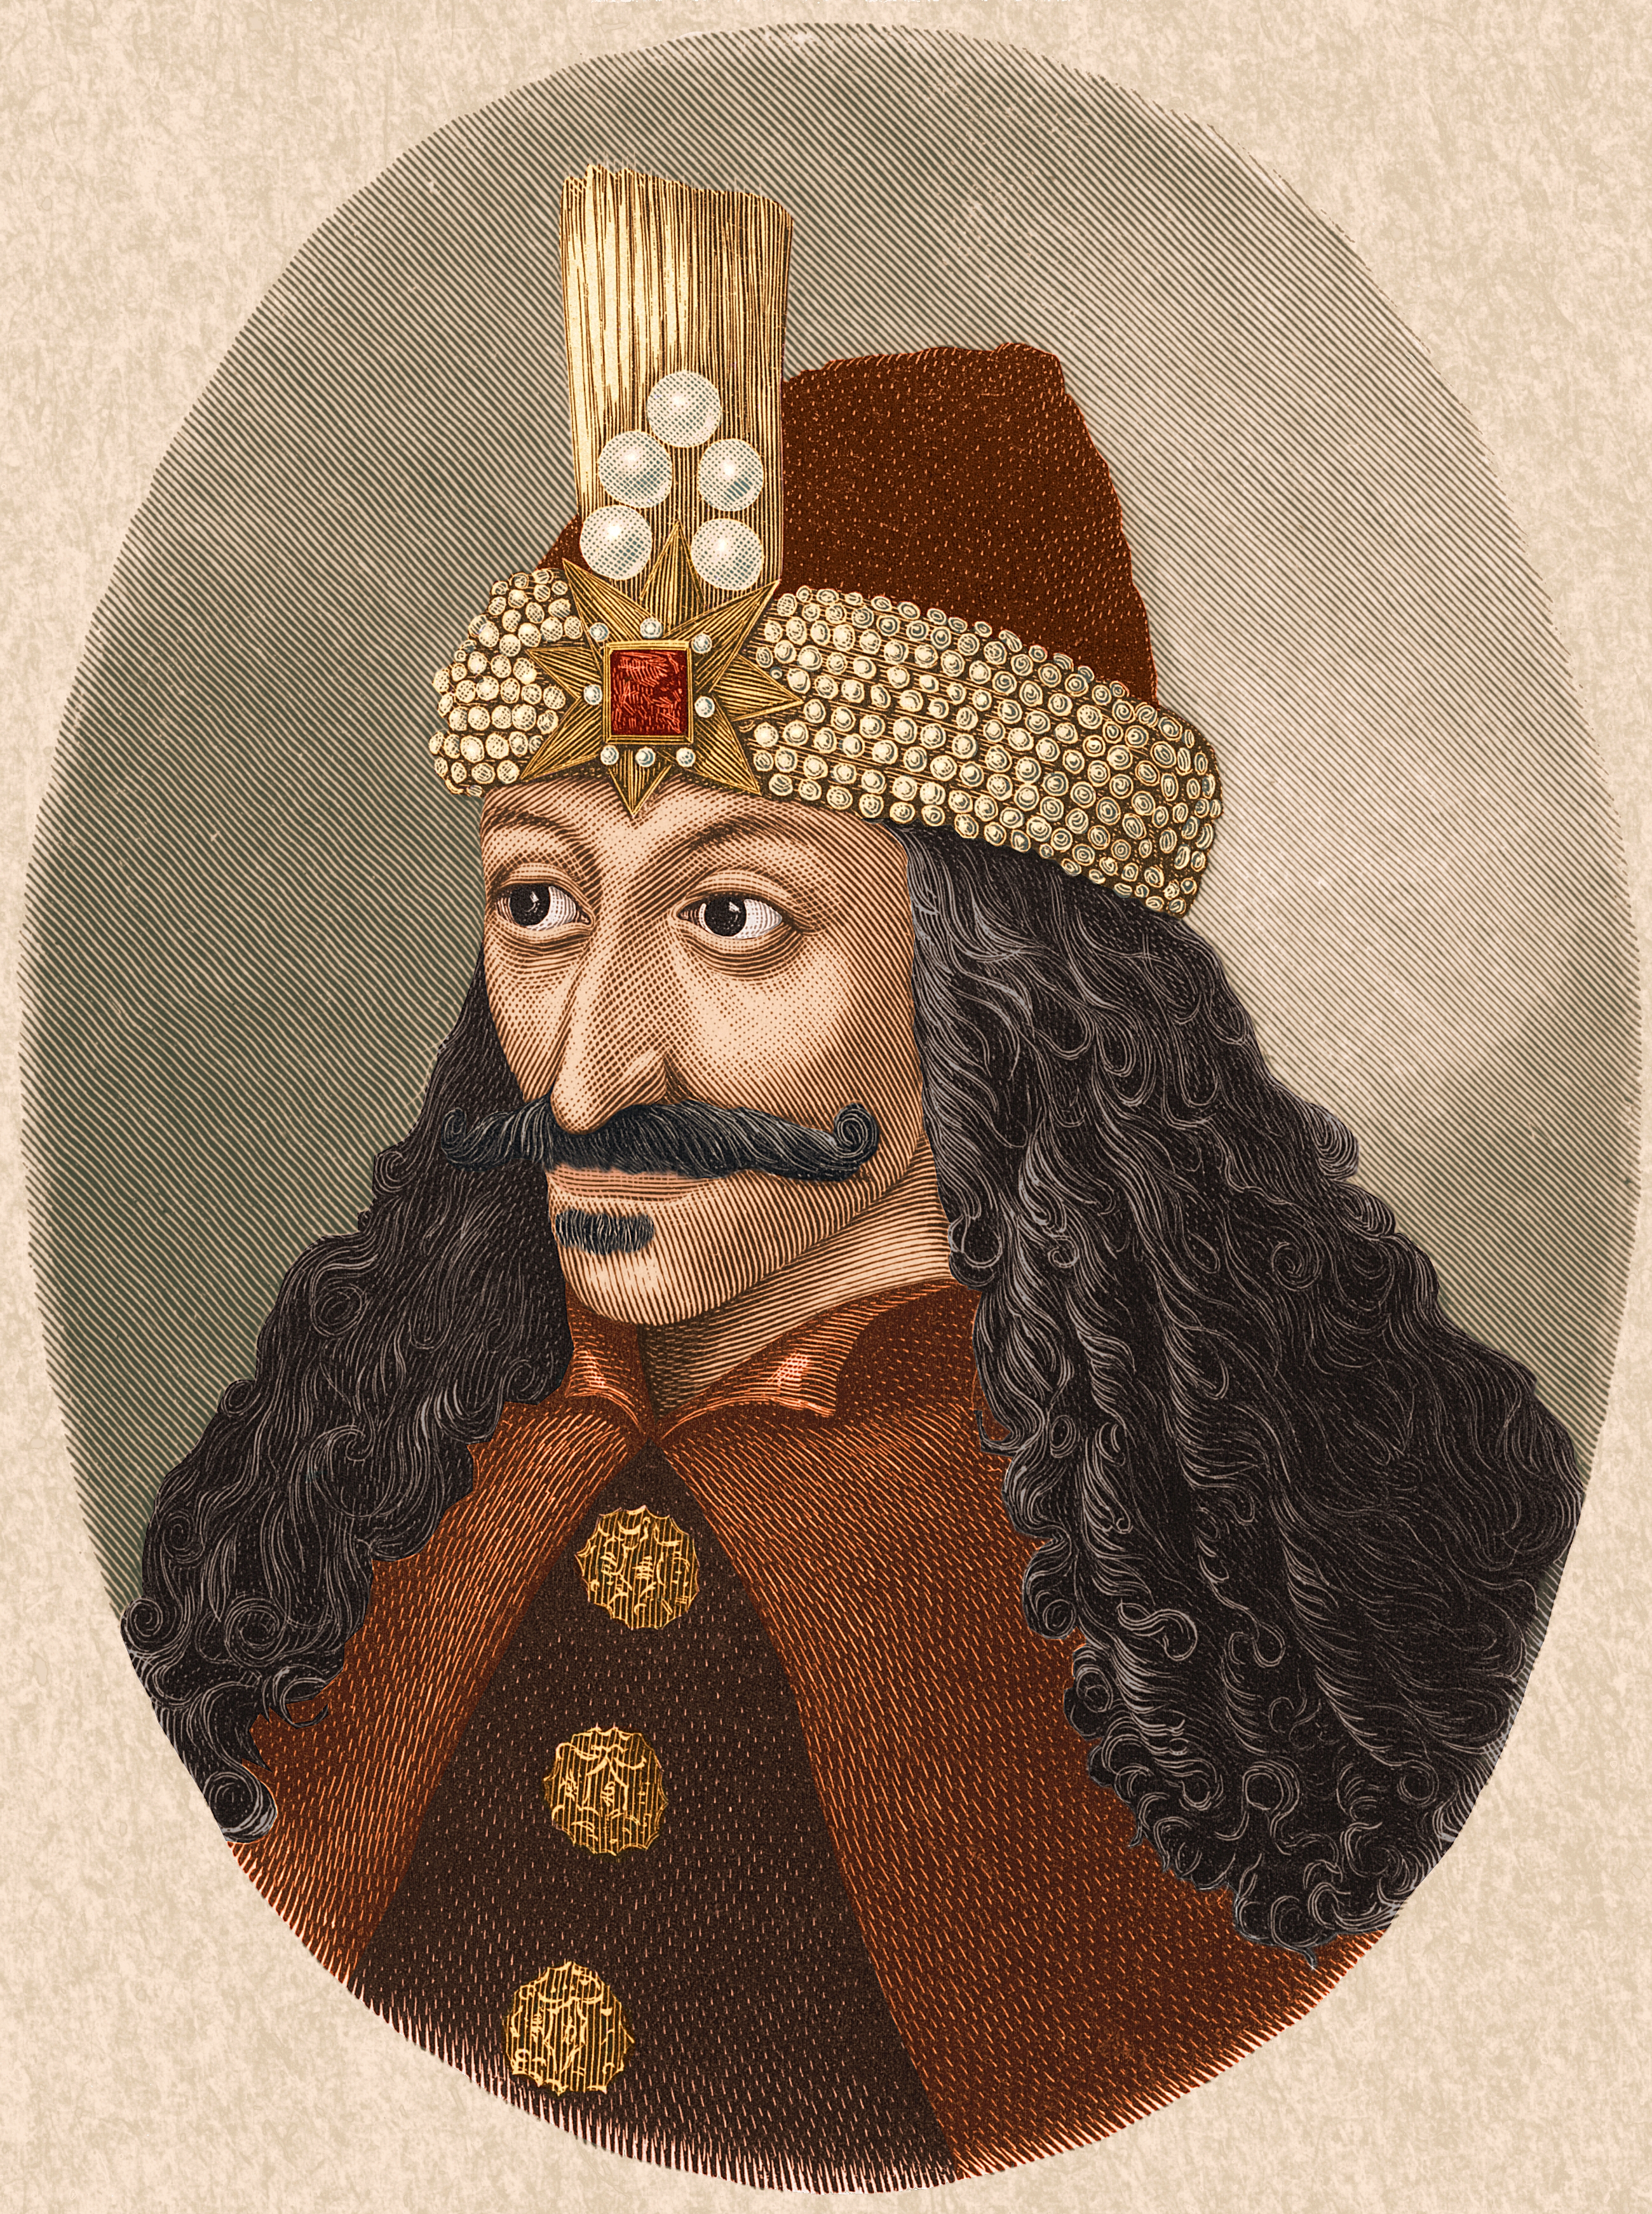 Circa 1450, portrait of Vlad Tepes  or Vlad the Impaler, from a painting in Castle Ambras in the Tyrol (Stock Montage/Getty Images)